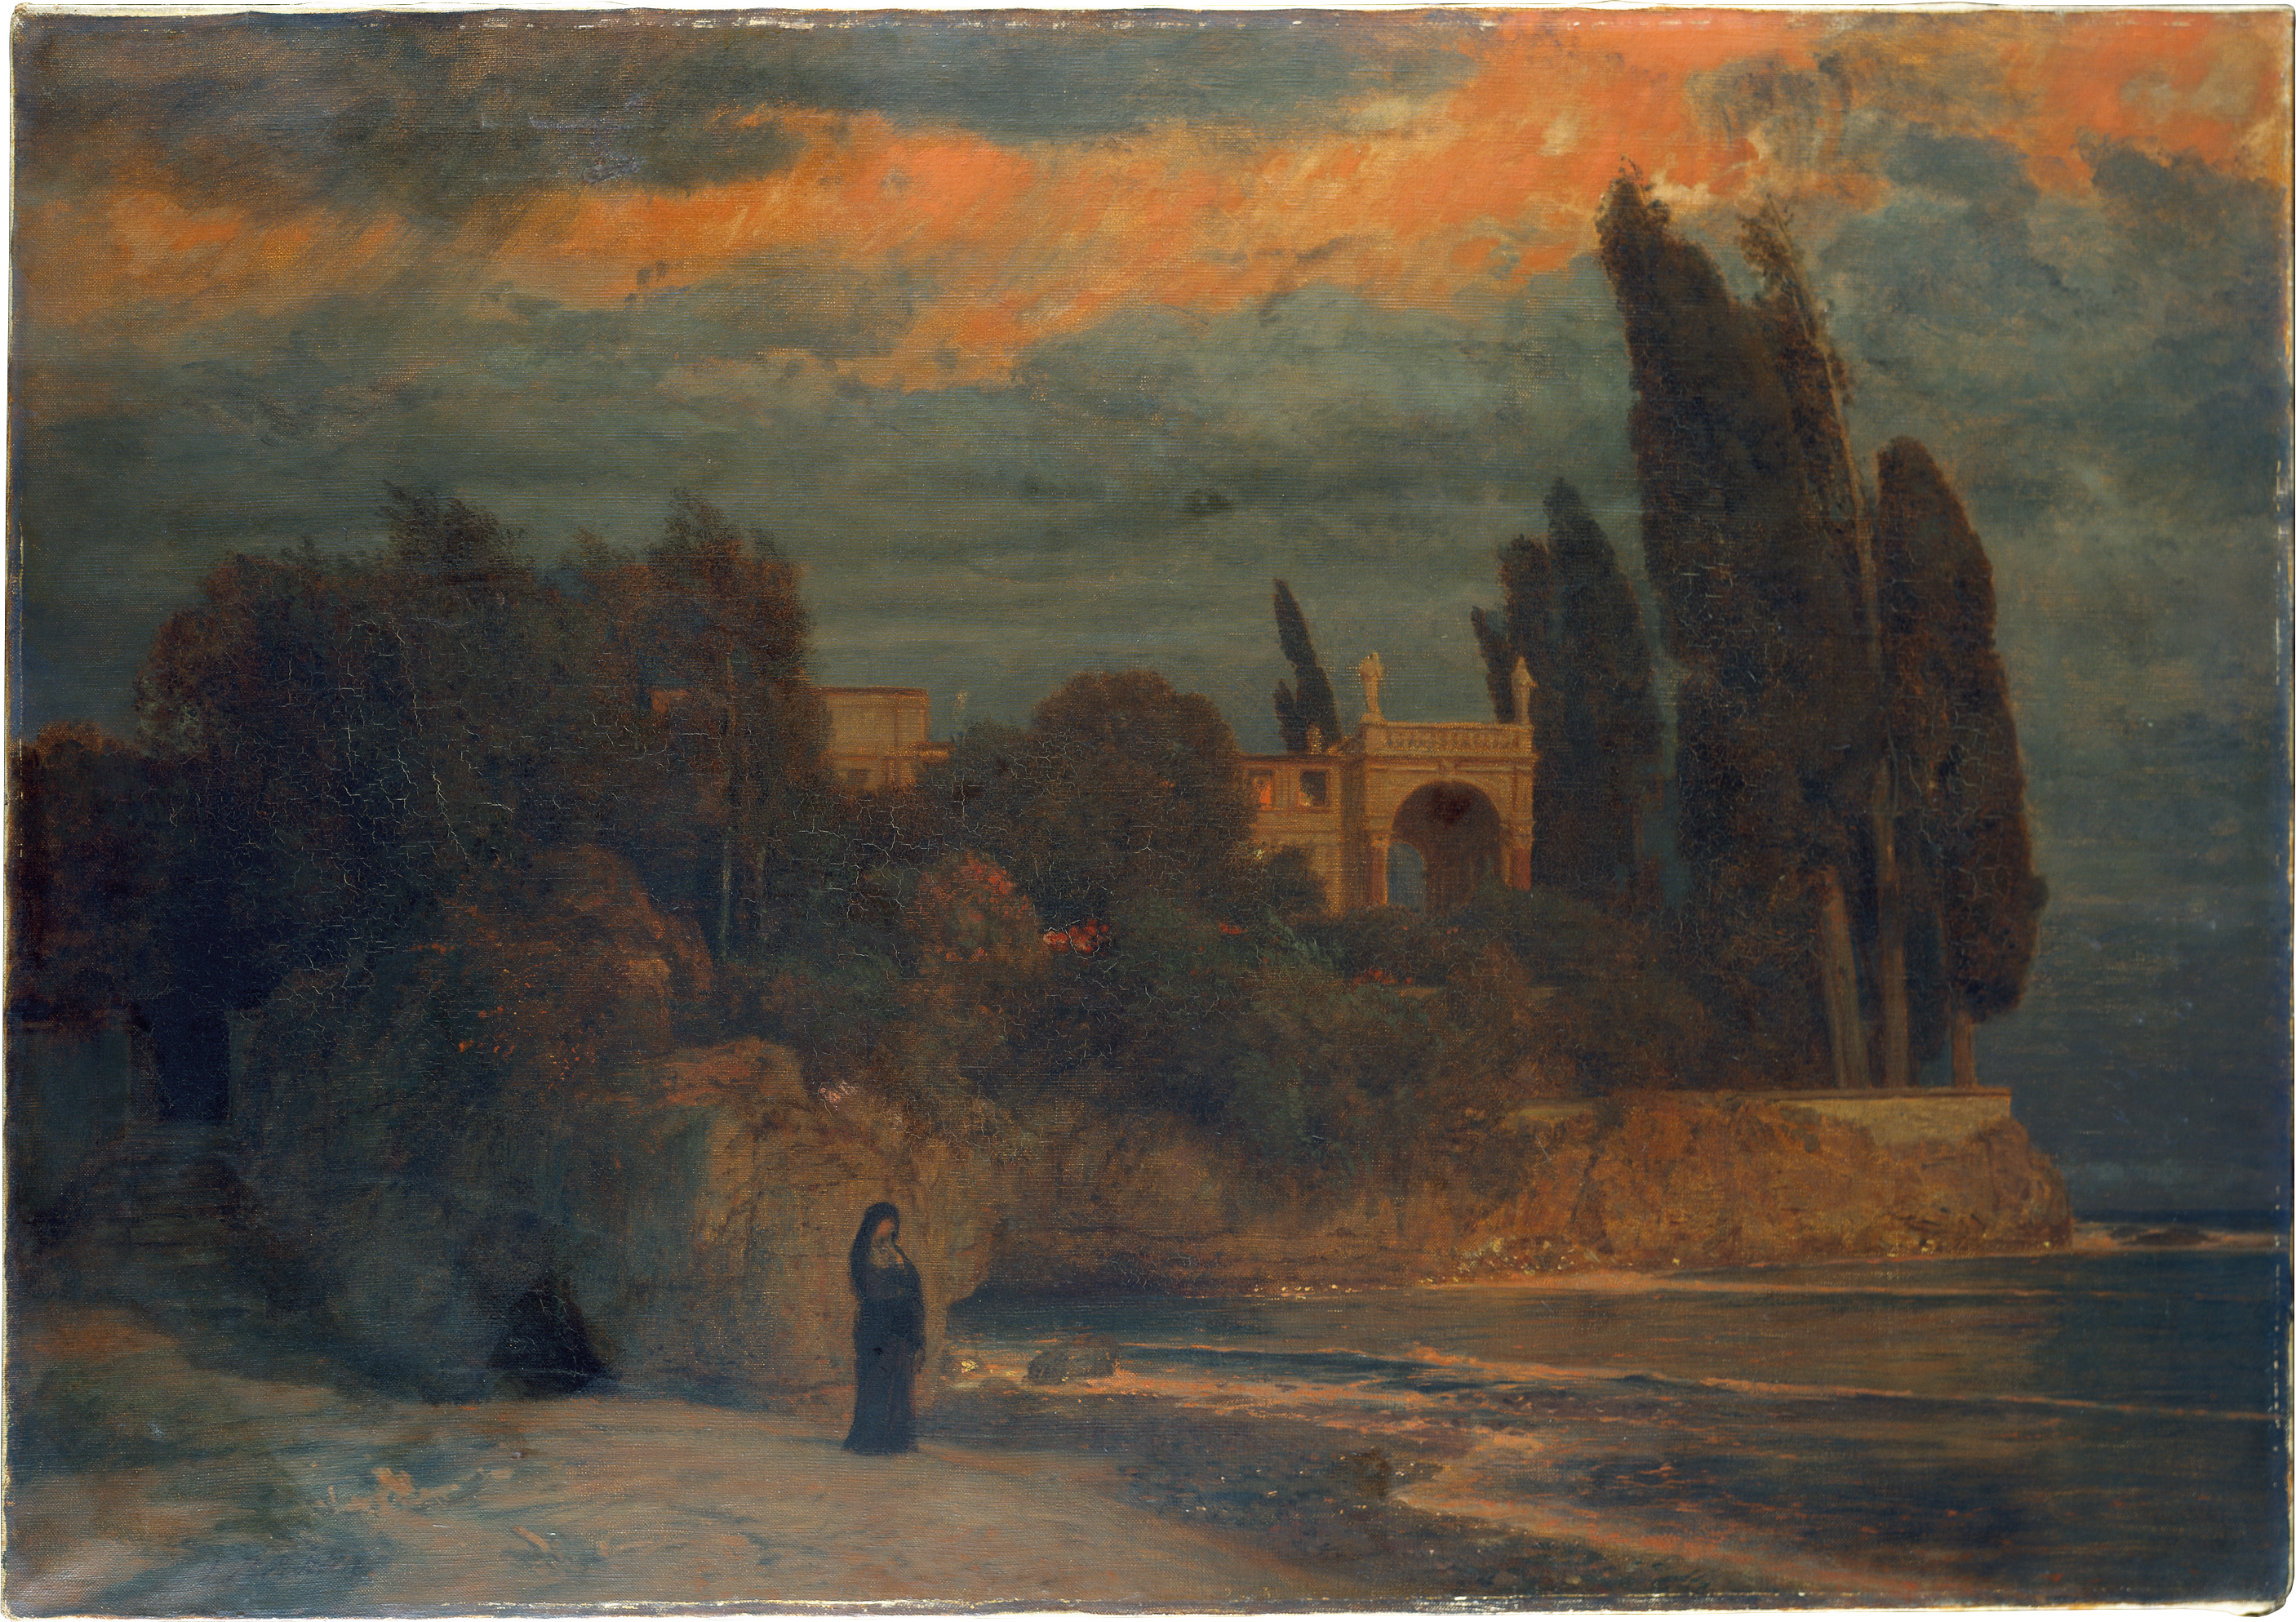 A lone figure standing on a beach with a villa in the background at sundown